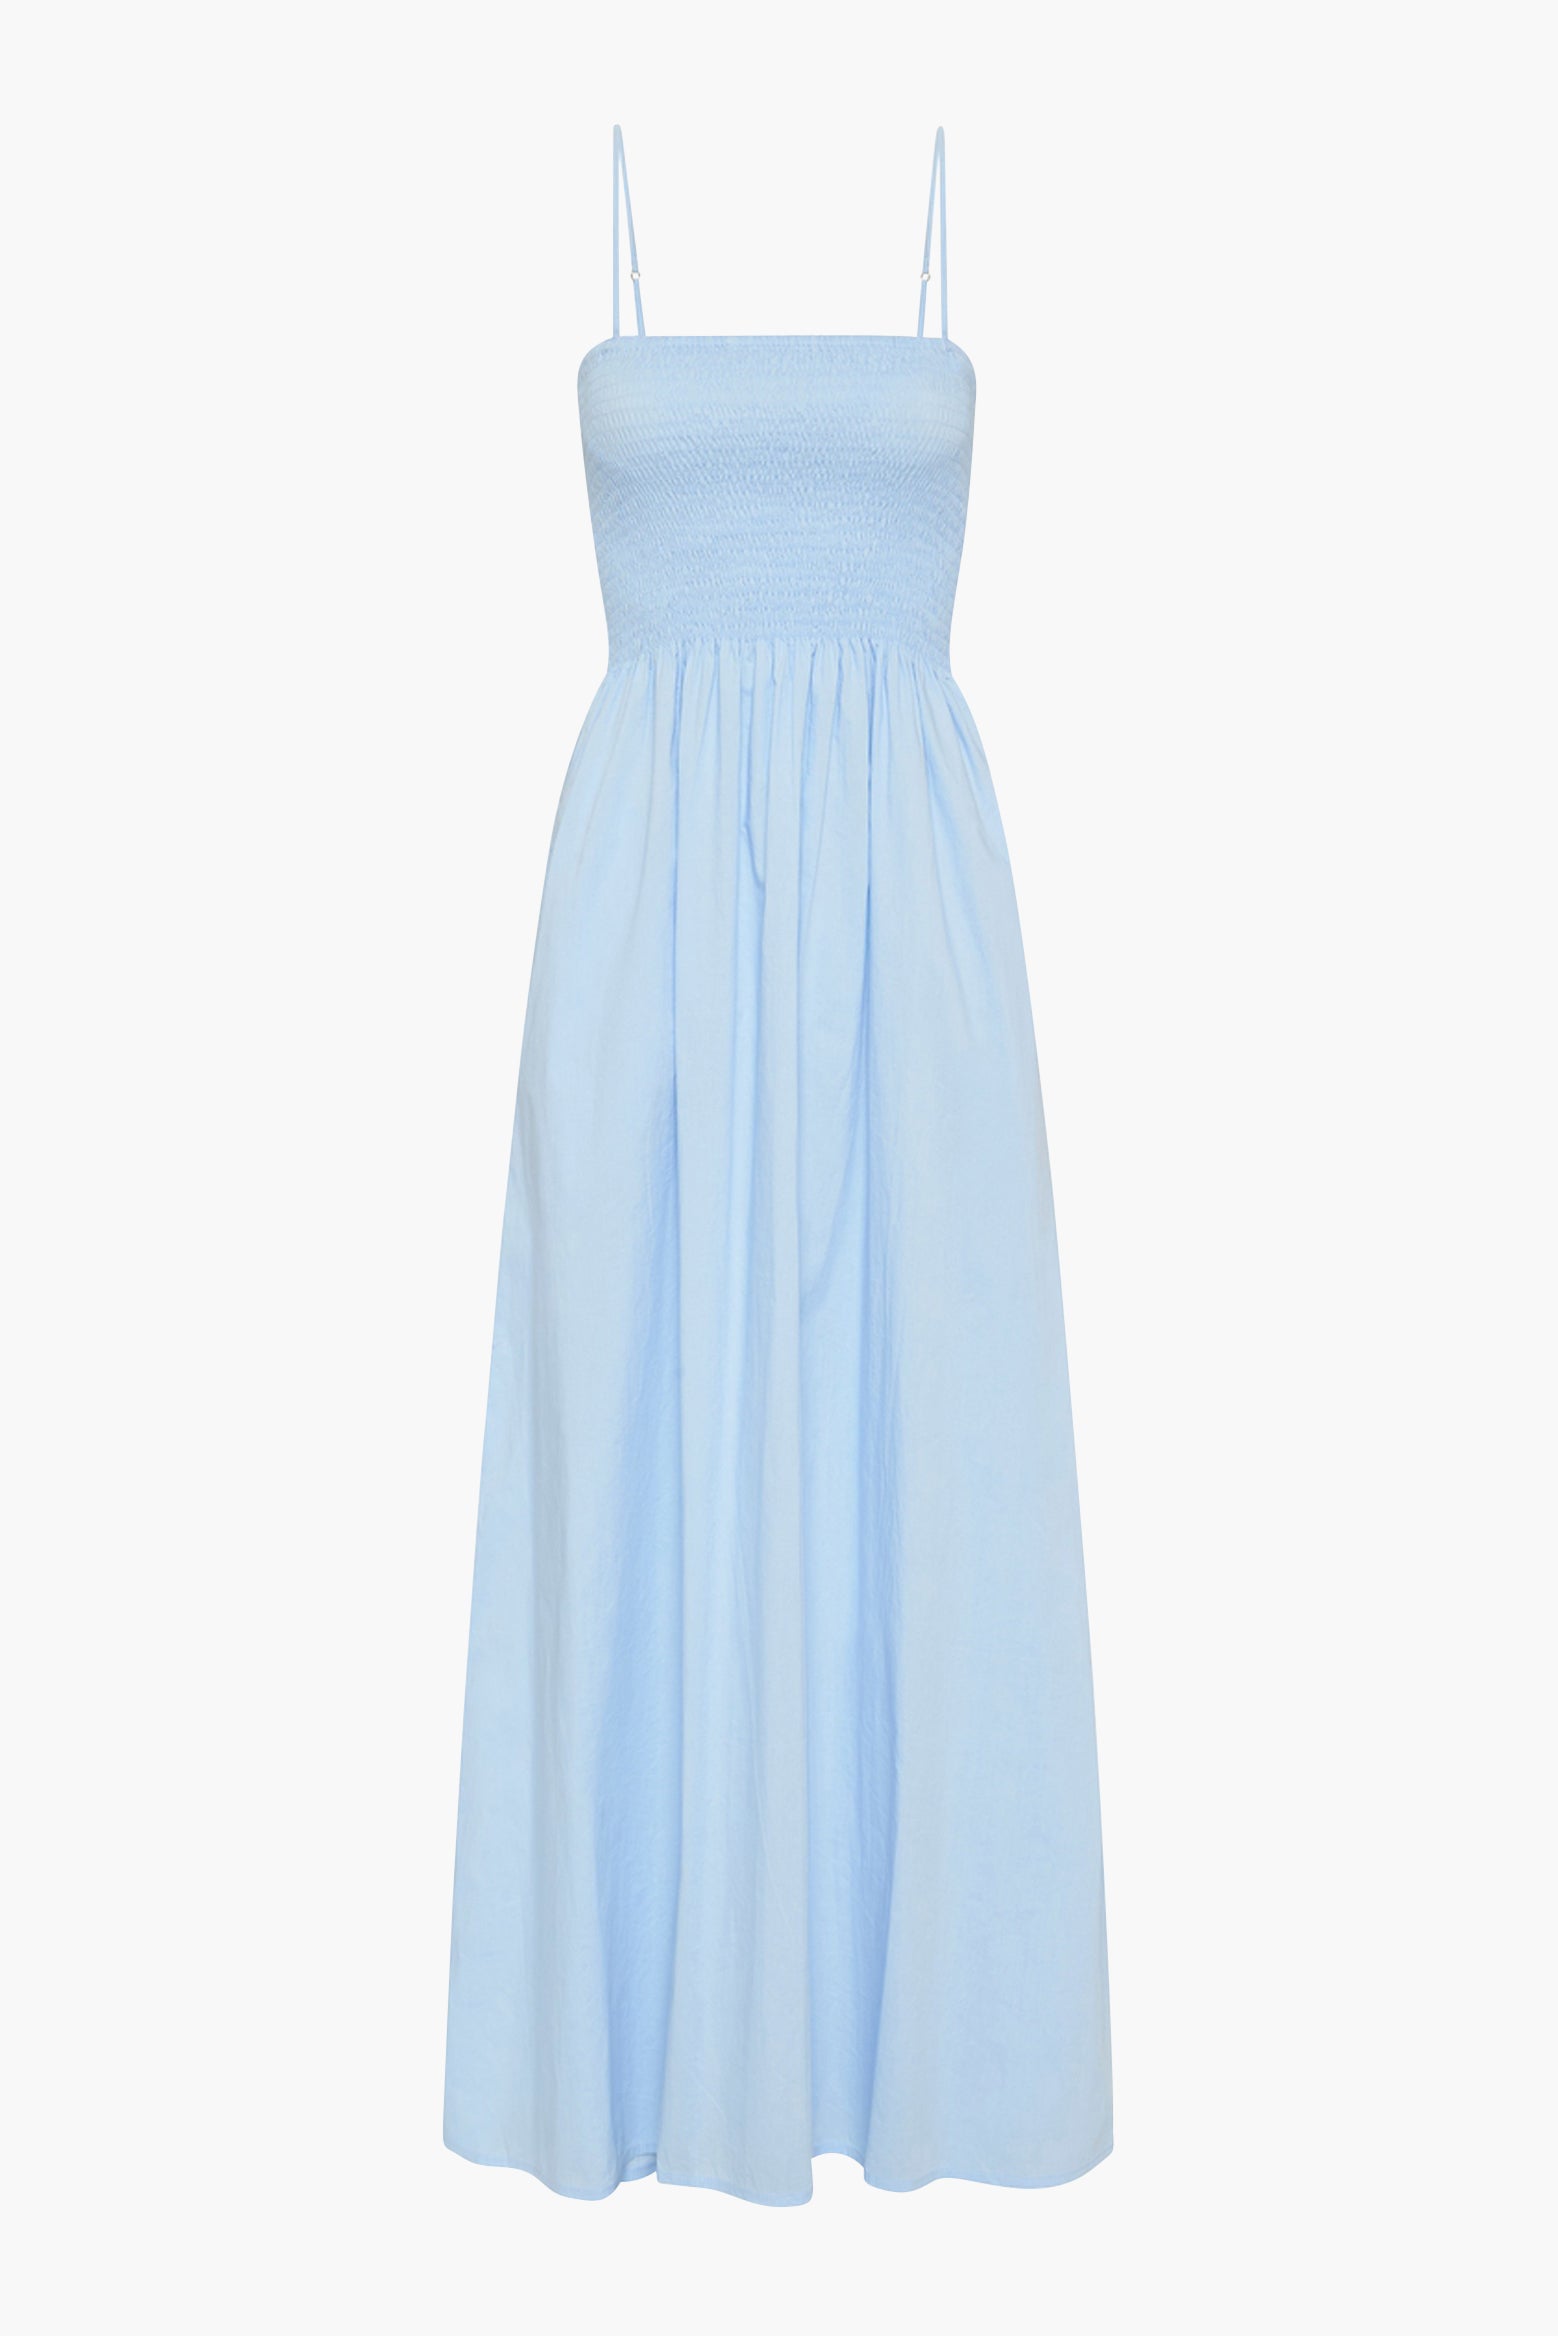 Faithfull The Brand Tergu Maxi Dress in Cornflower Blue available at The New Trend